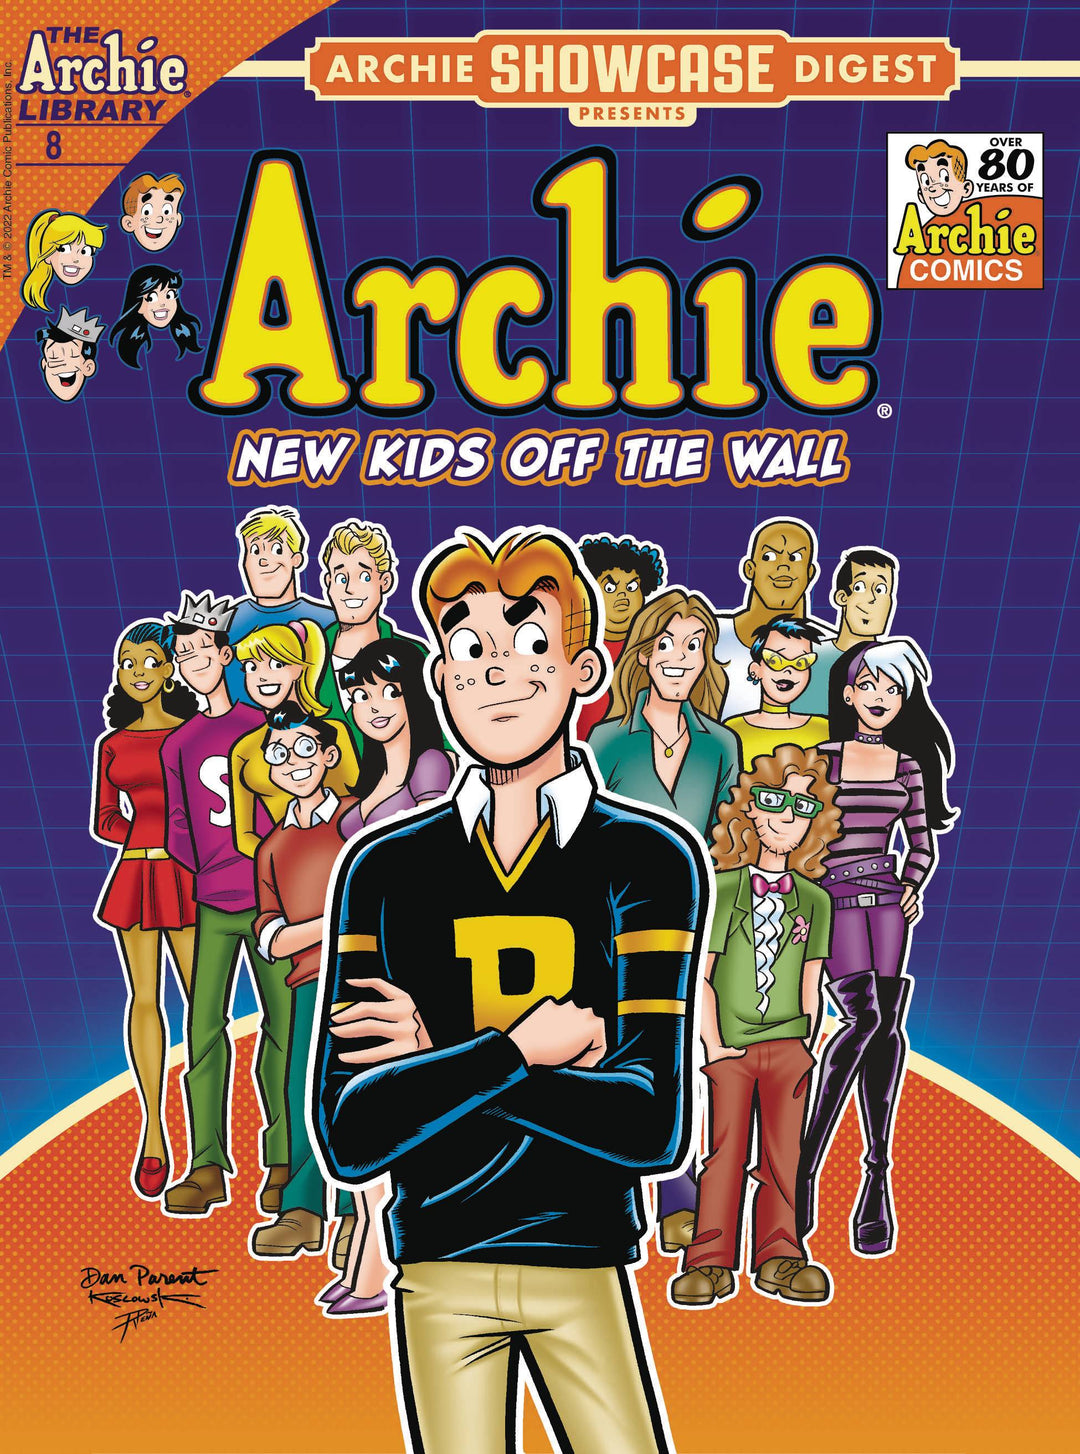 Archie Showcase Digest #8 New Kids Off The Wall